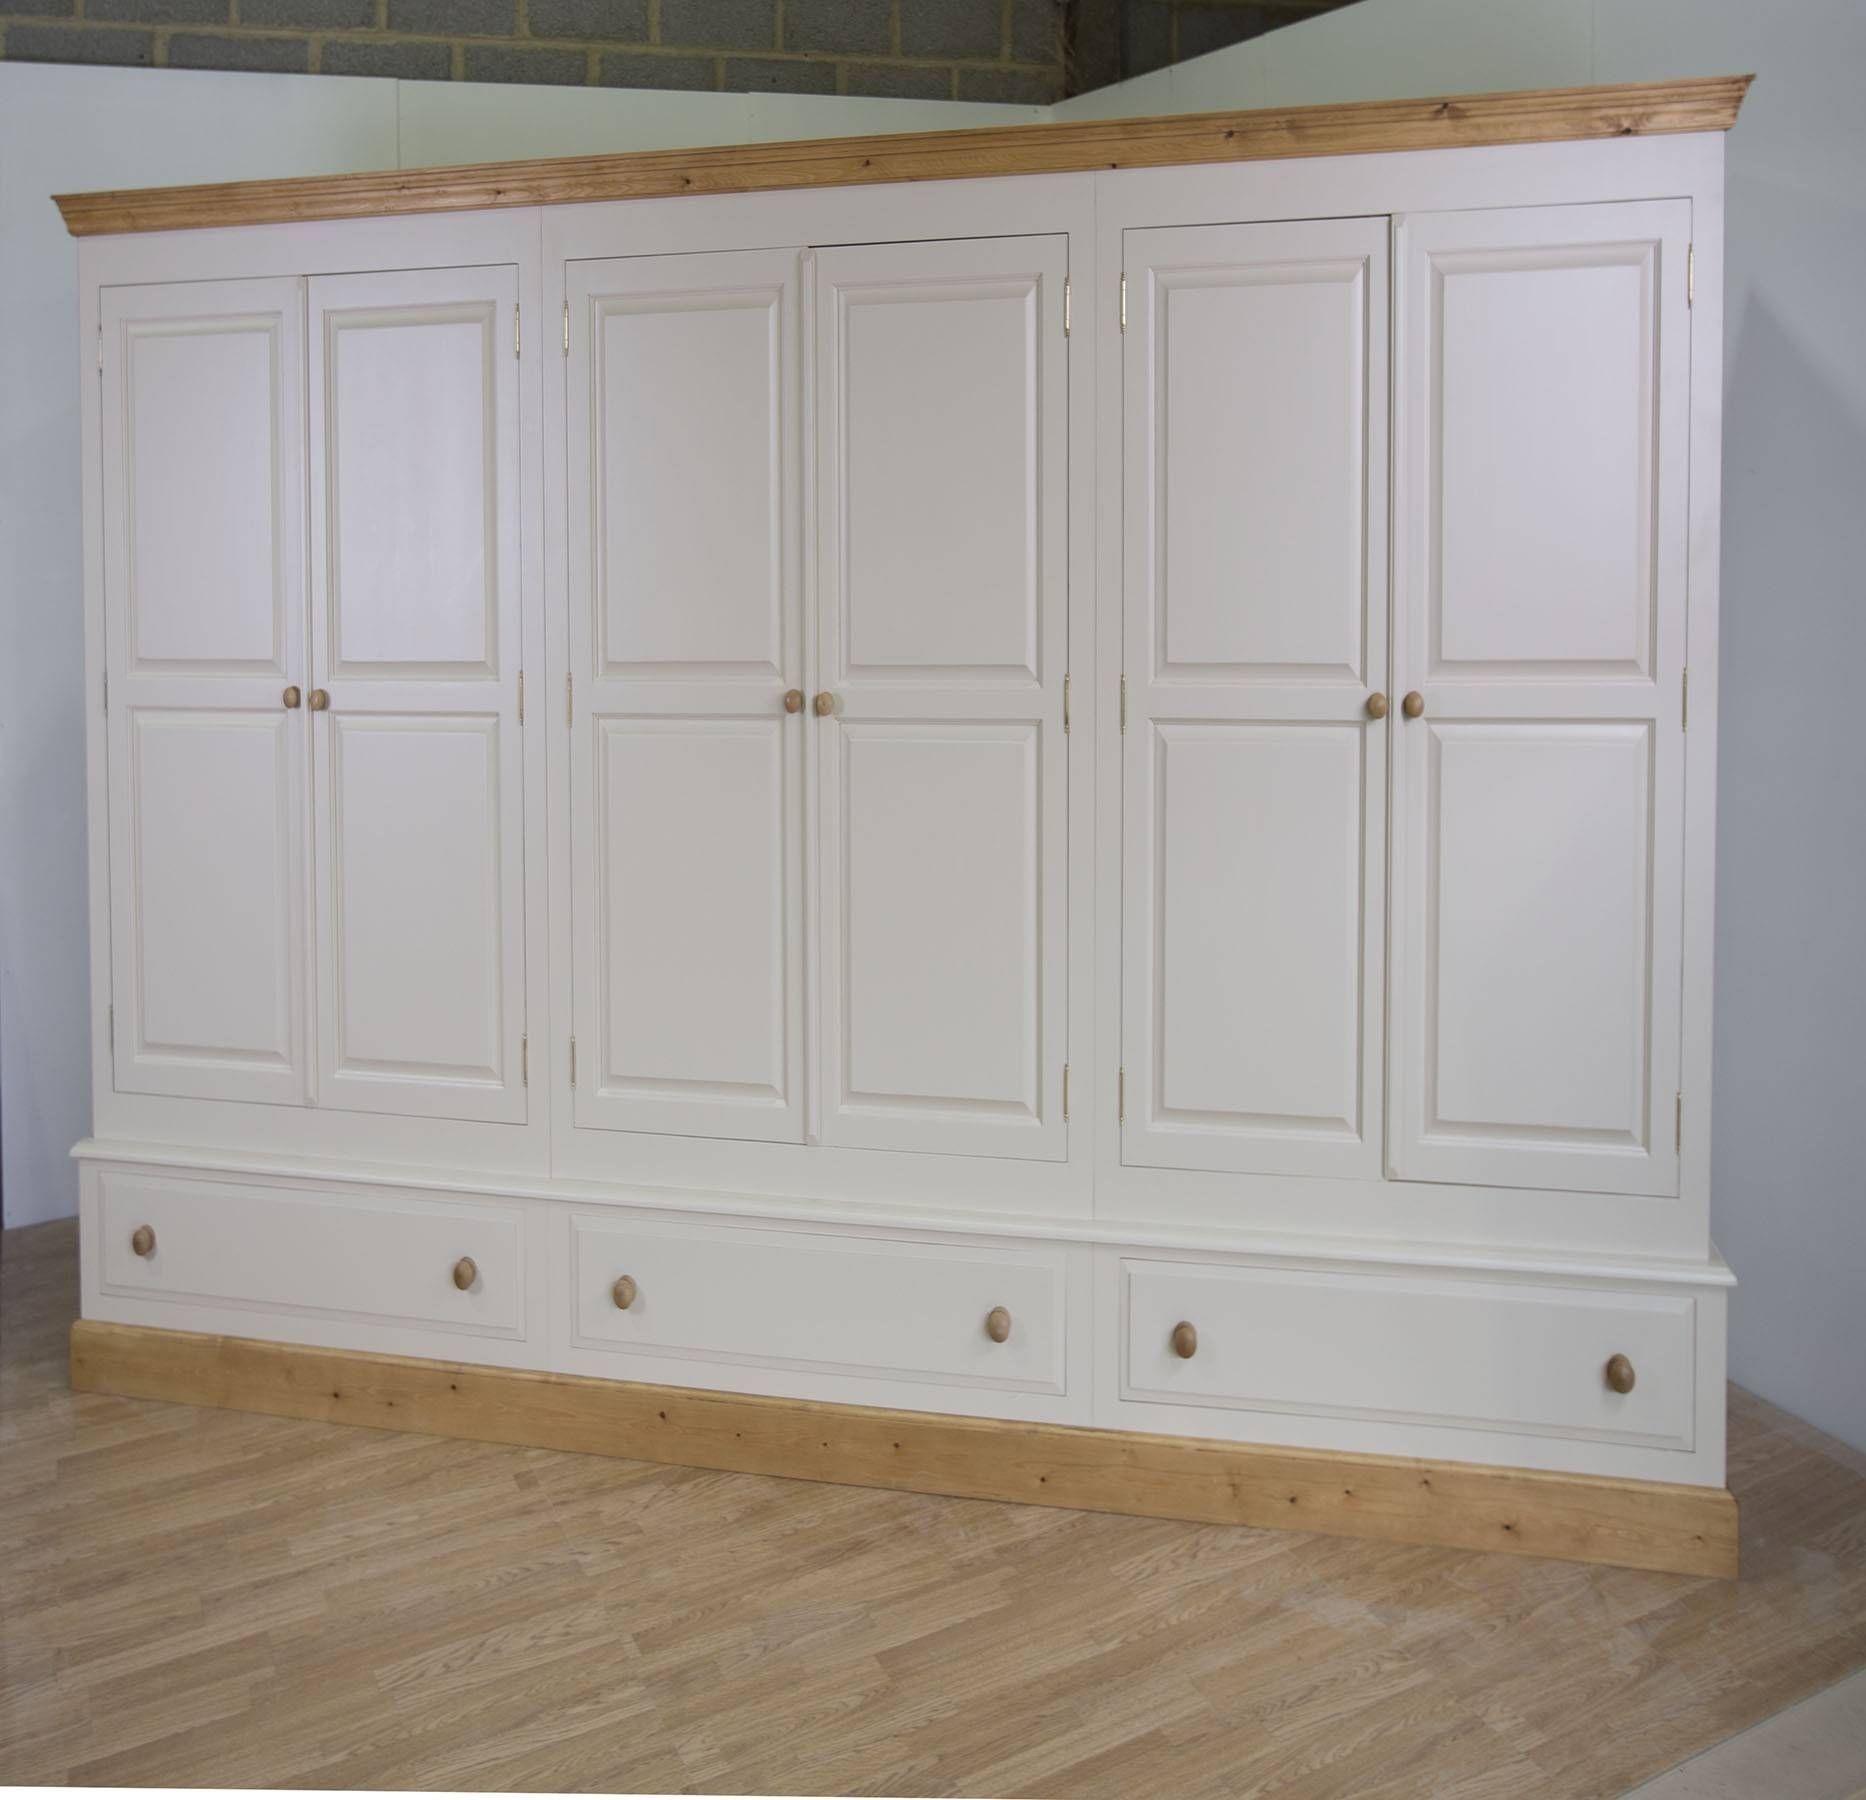 Farrow & Ball Painted Large 6 Door Wardrobe With Drawers Pertaining To Pine Wardrobes With Drawers (View 13 of 15)